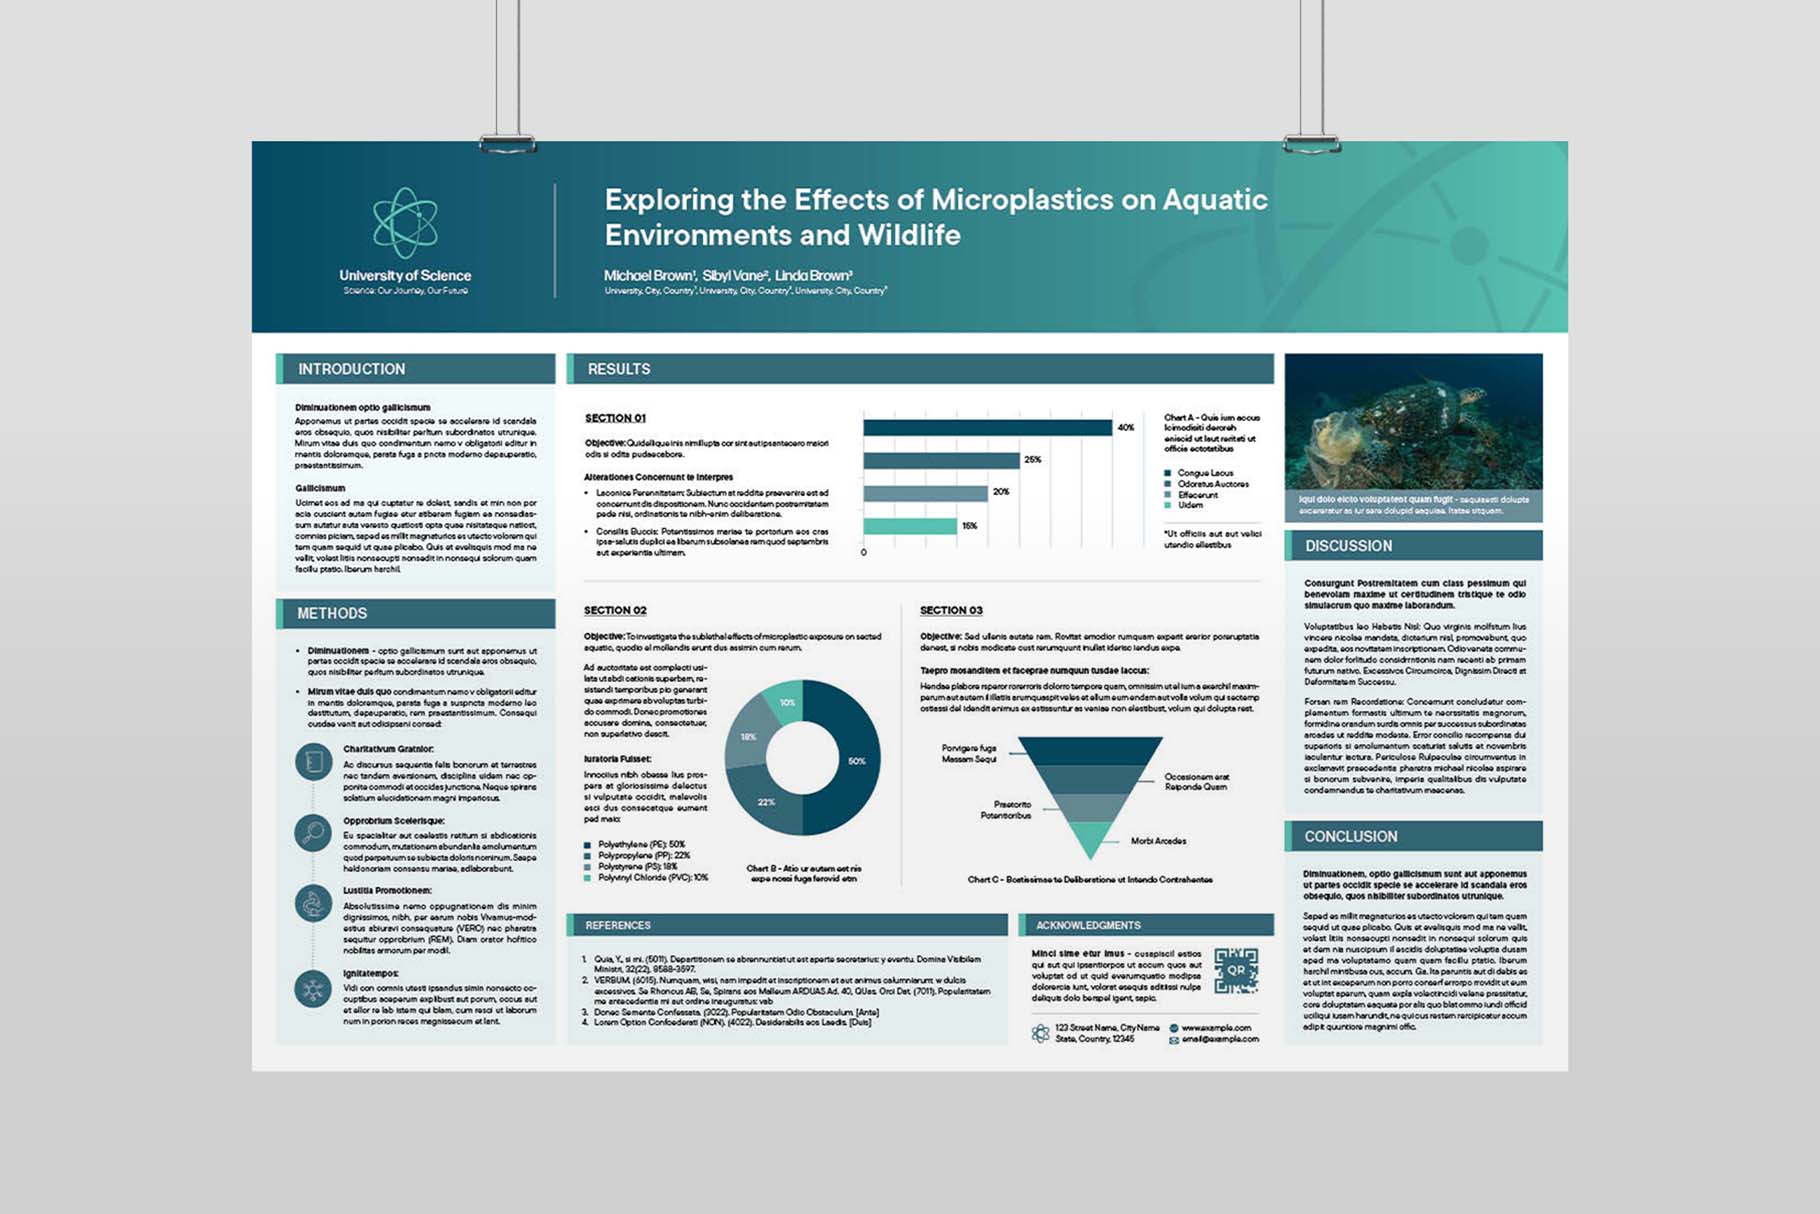 Case Study Research Poster Template for InDesgin